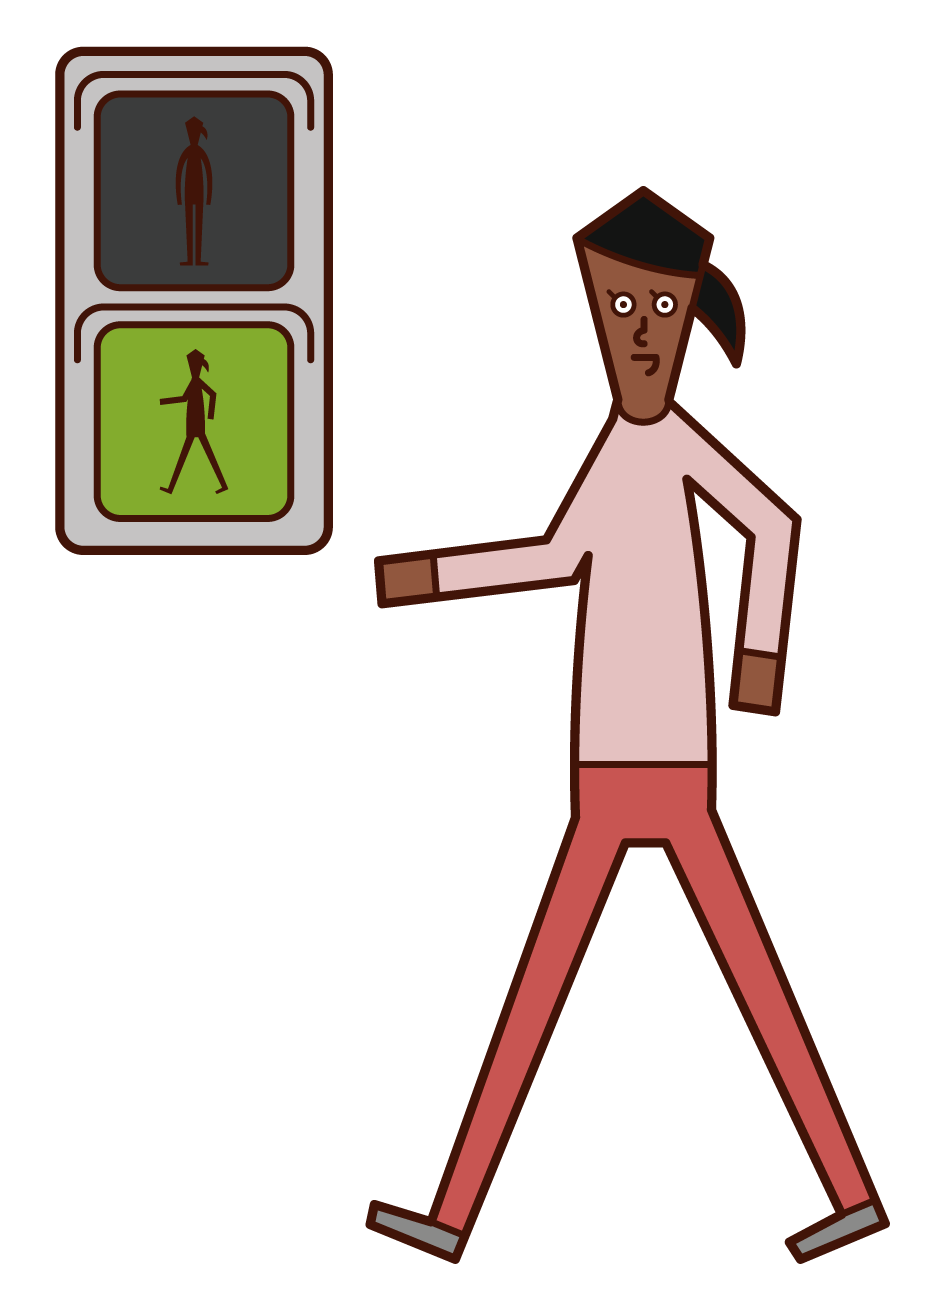 Illustration of a woman advancing at a green light